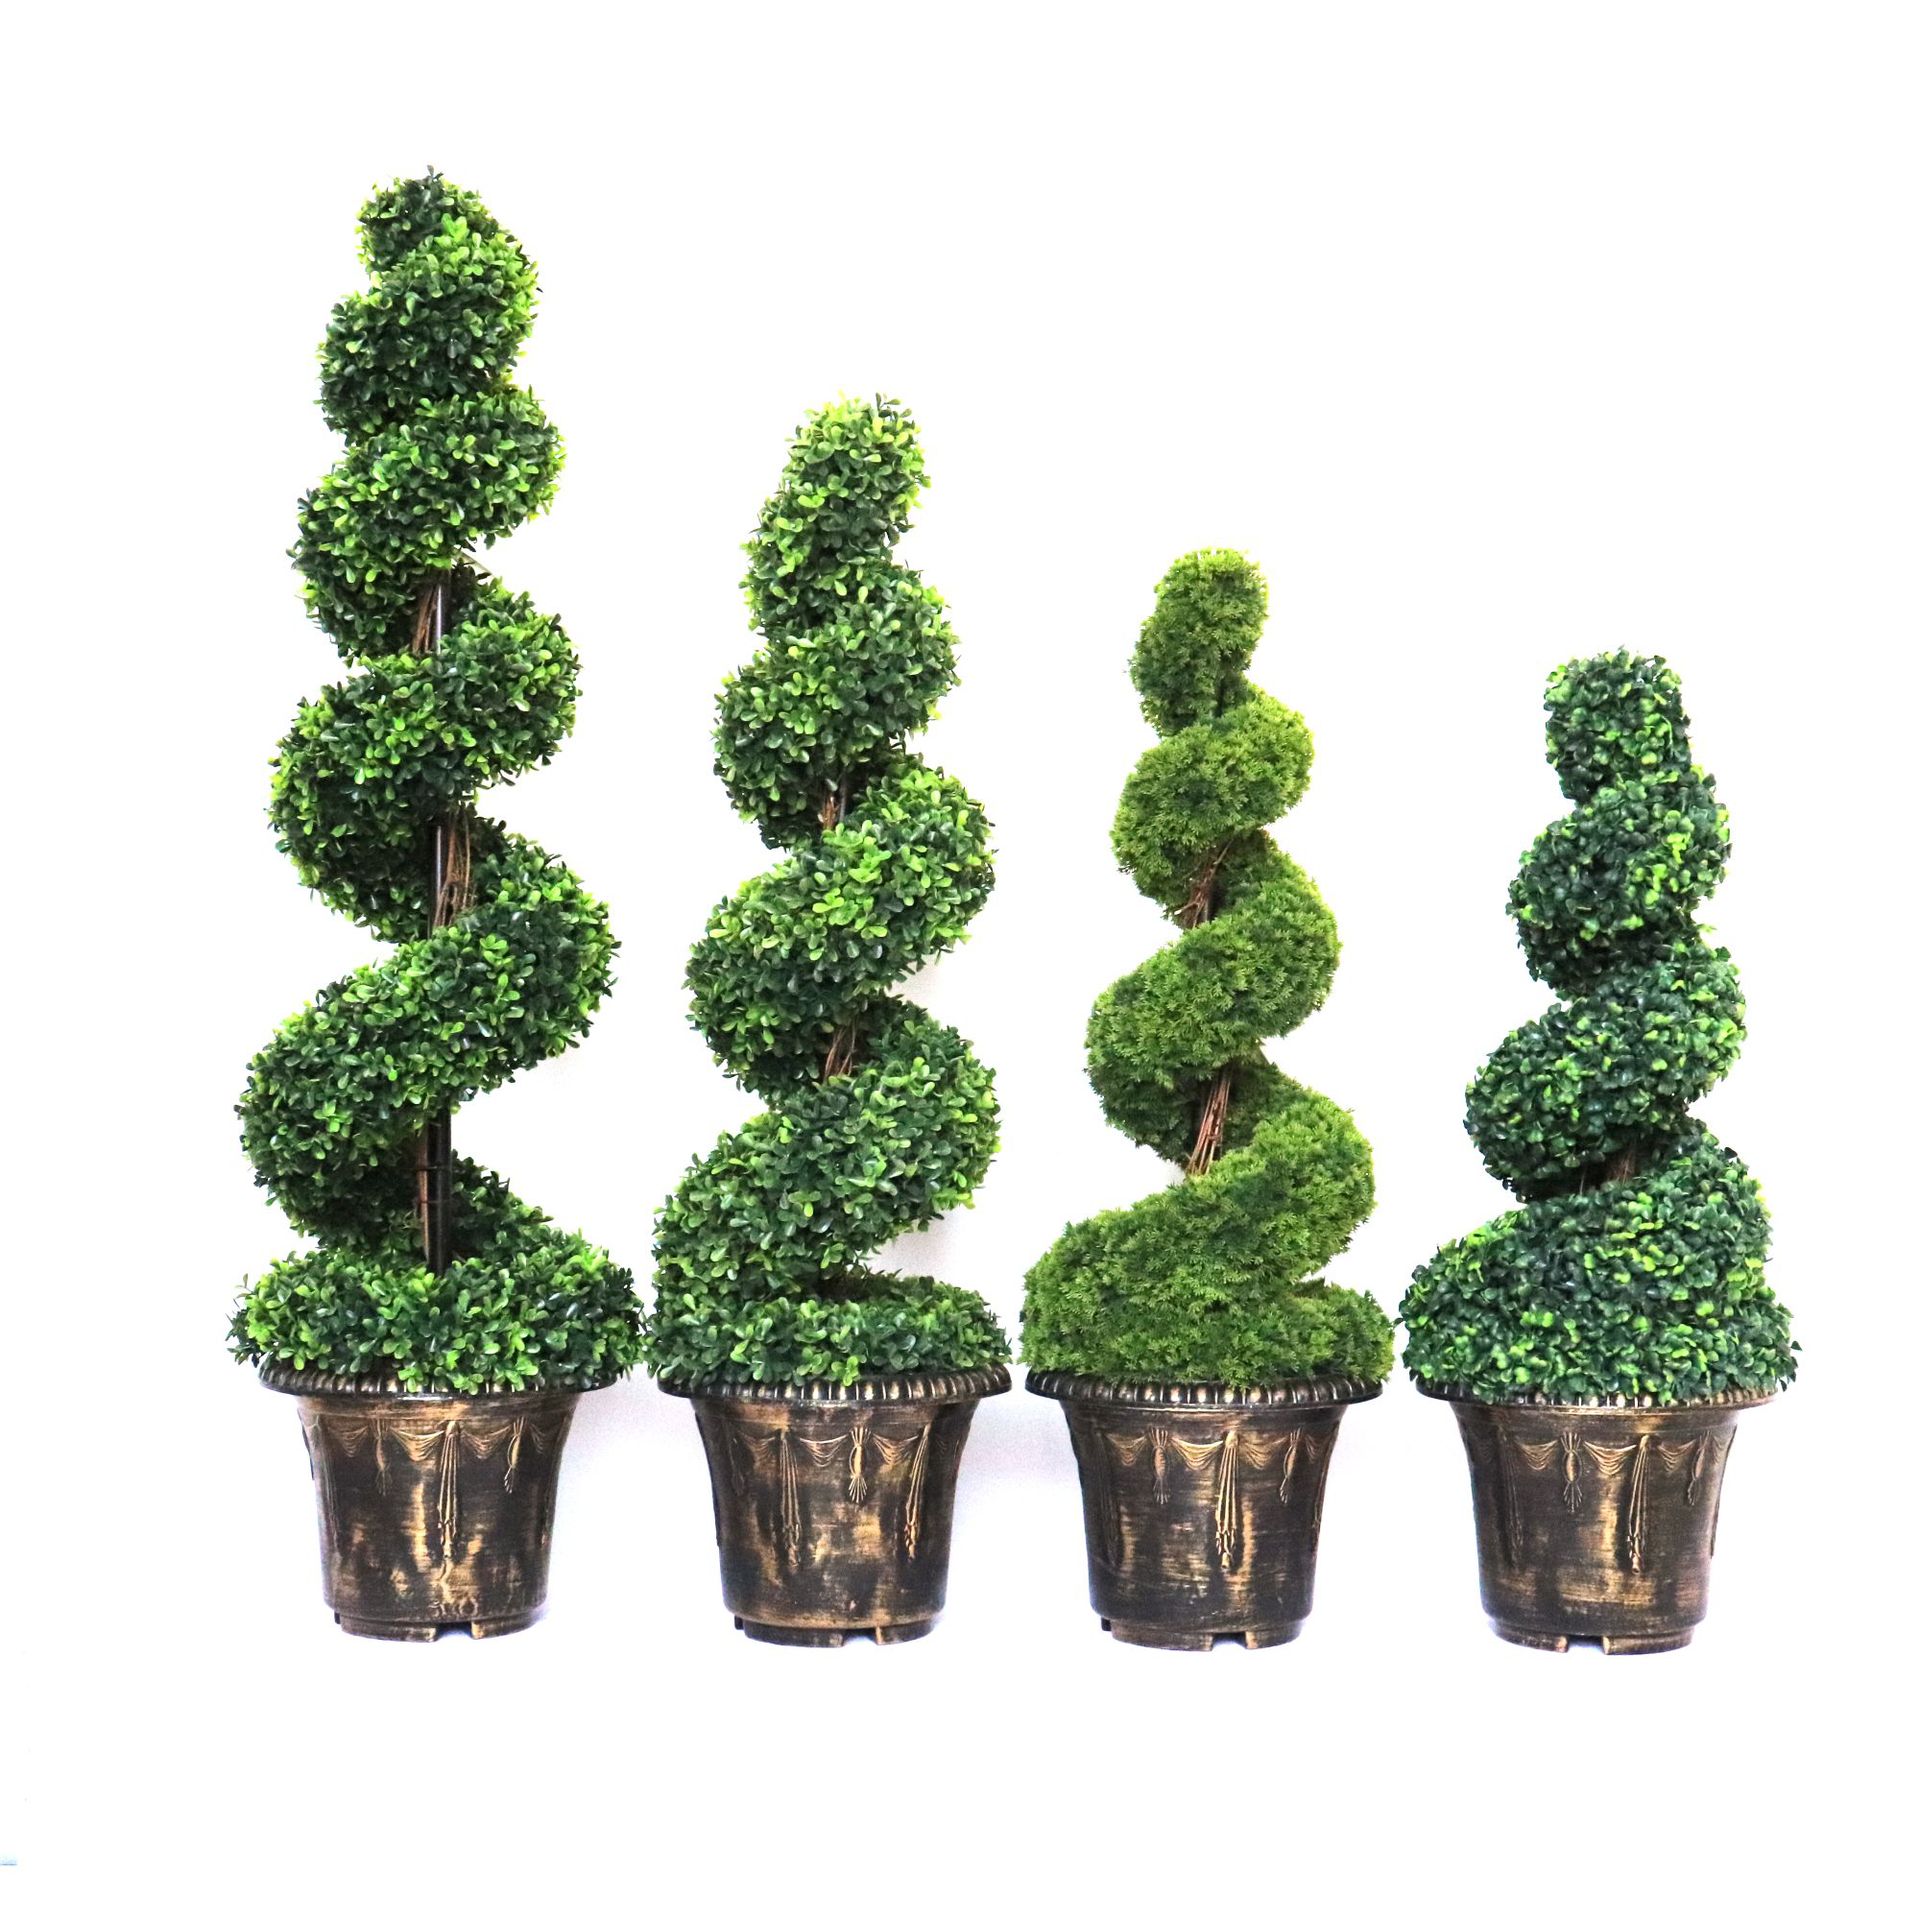 Simulation Plant Plastic Grass Games Ball Encryption Milan Grass Pot Large Indoor Living Room Home Pastoral Melon Seeds Grass Green Plant